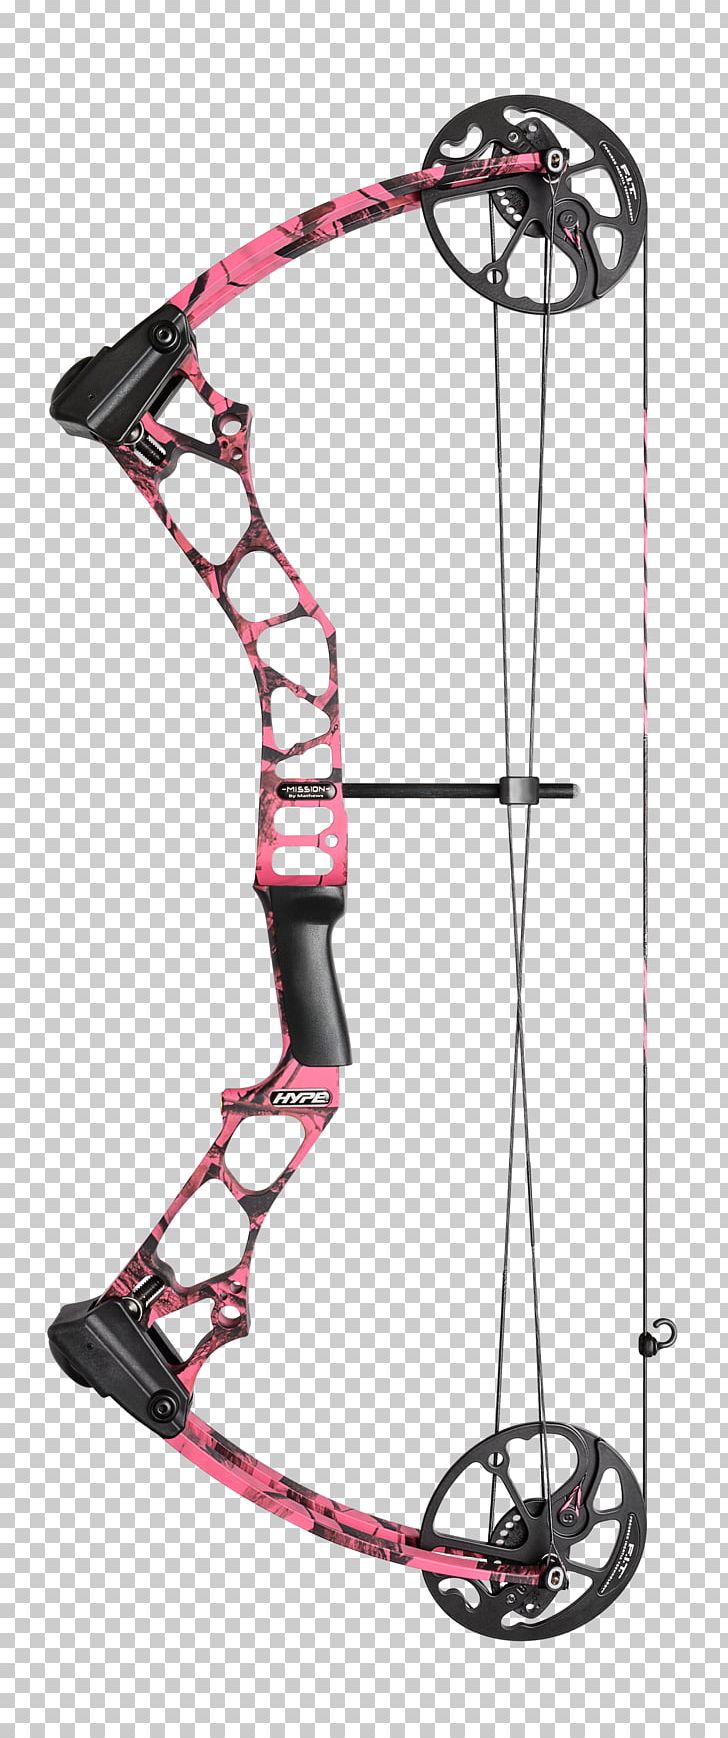 Archery Compound Bows Bow And Arrow Bowhunting PNG, Clipart, Archery, Arrow, Bow And Arrow, Bowhunting, Cam Free PNG Download